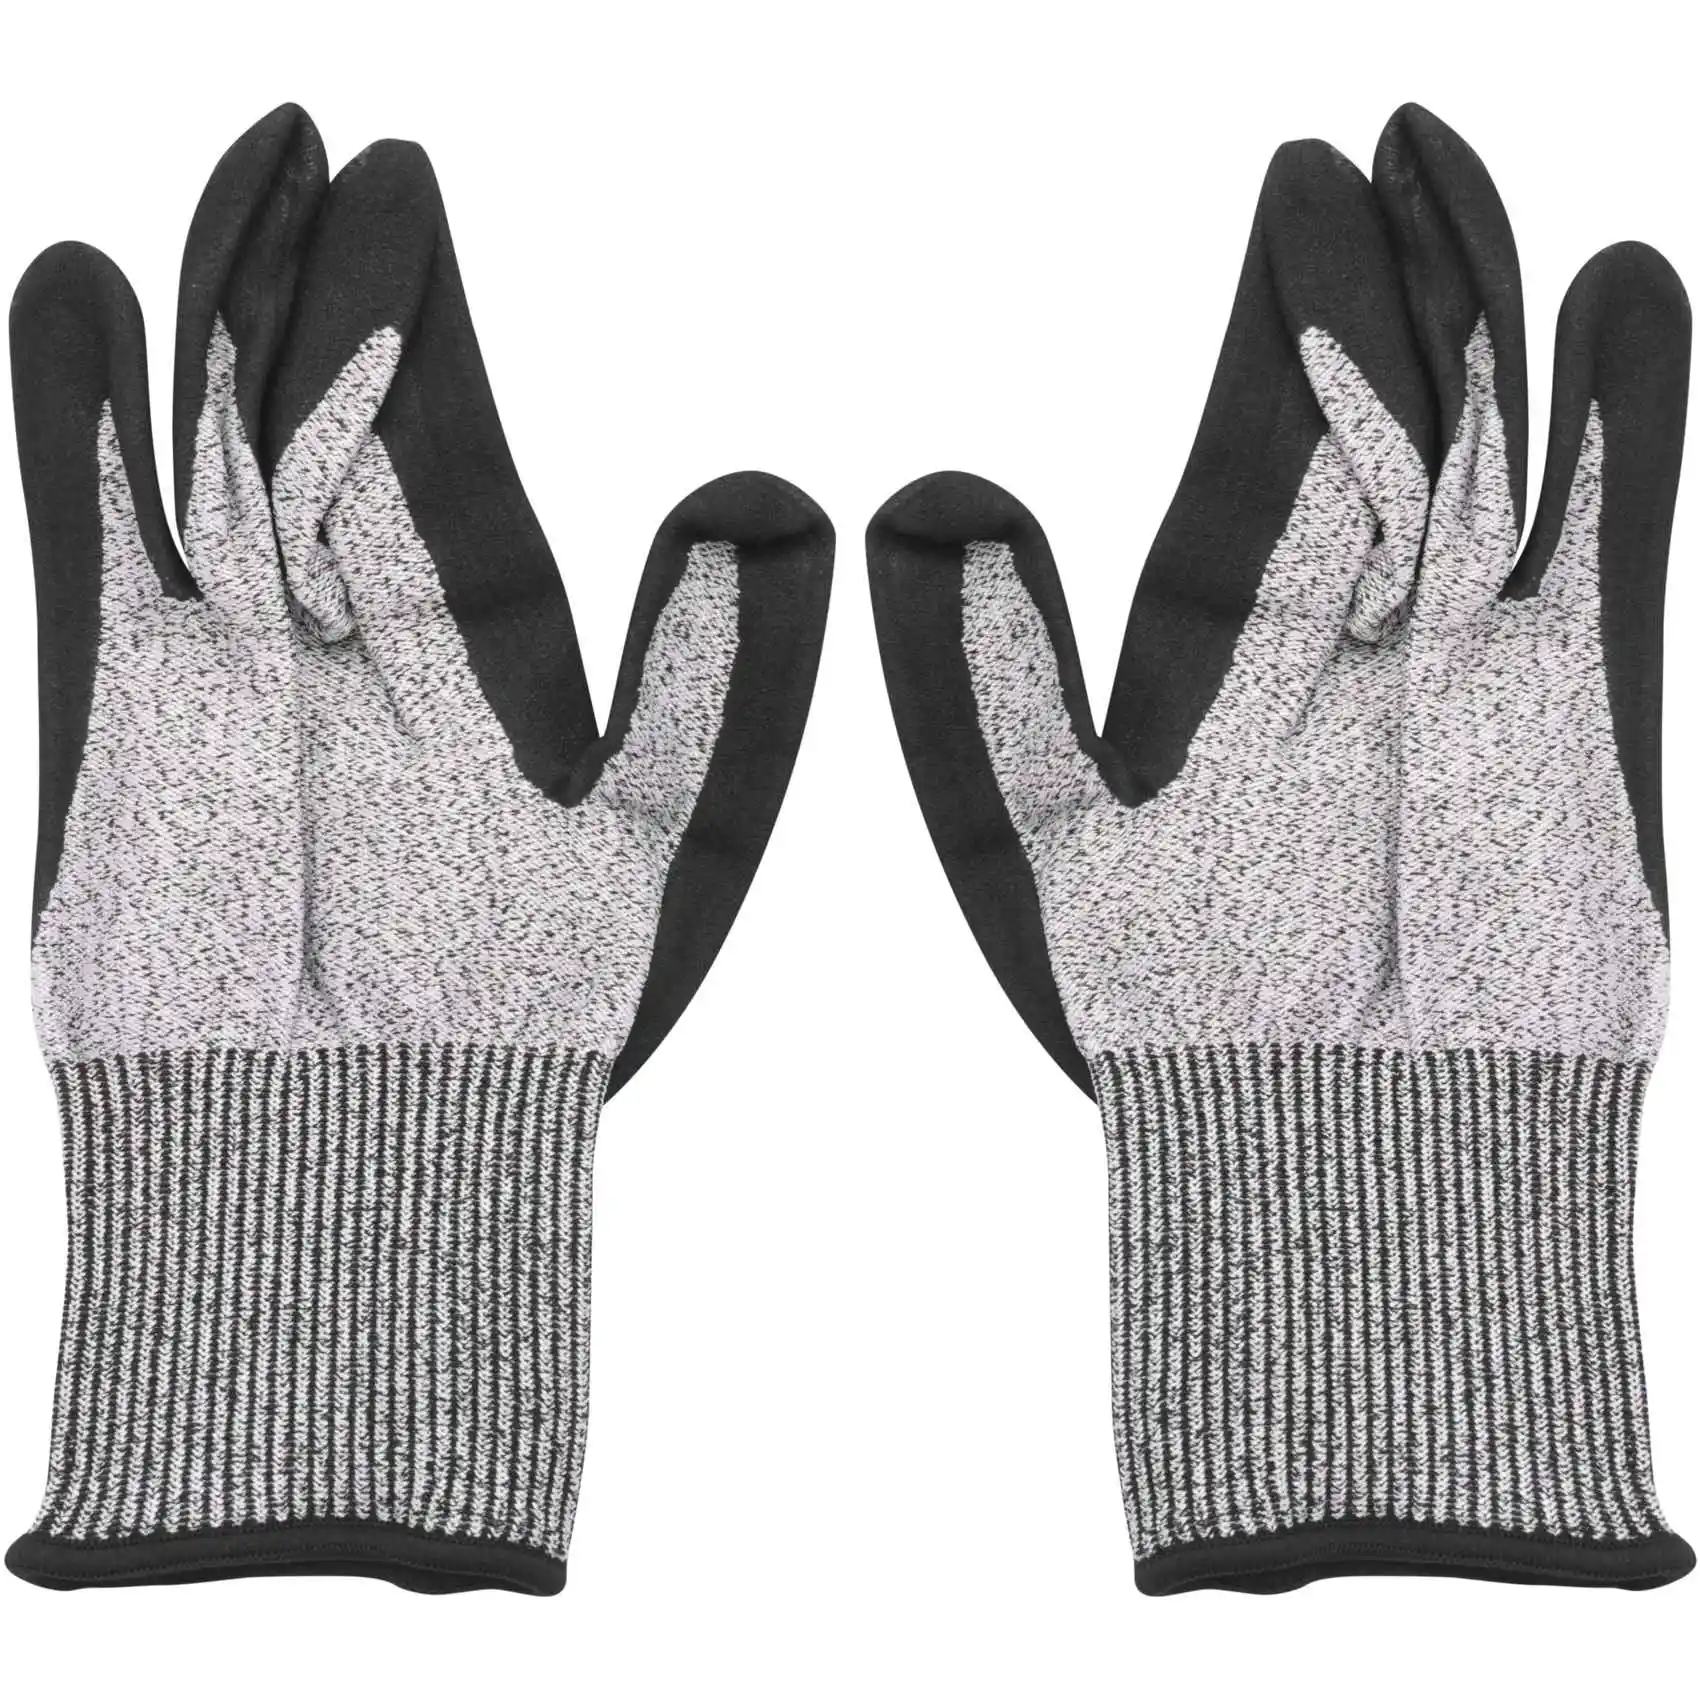 

Level 5 Cut Resistant Gloves 3D Comfort Stretch Fit Durable Power Grip Foam Nitrile Pass Fda Food Contact Smart Touch Thin Ma